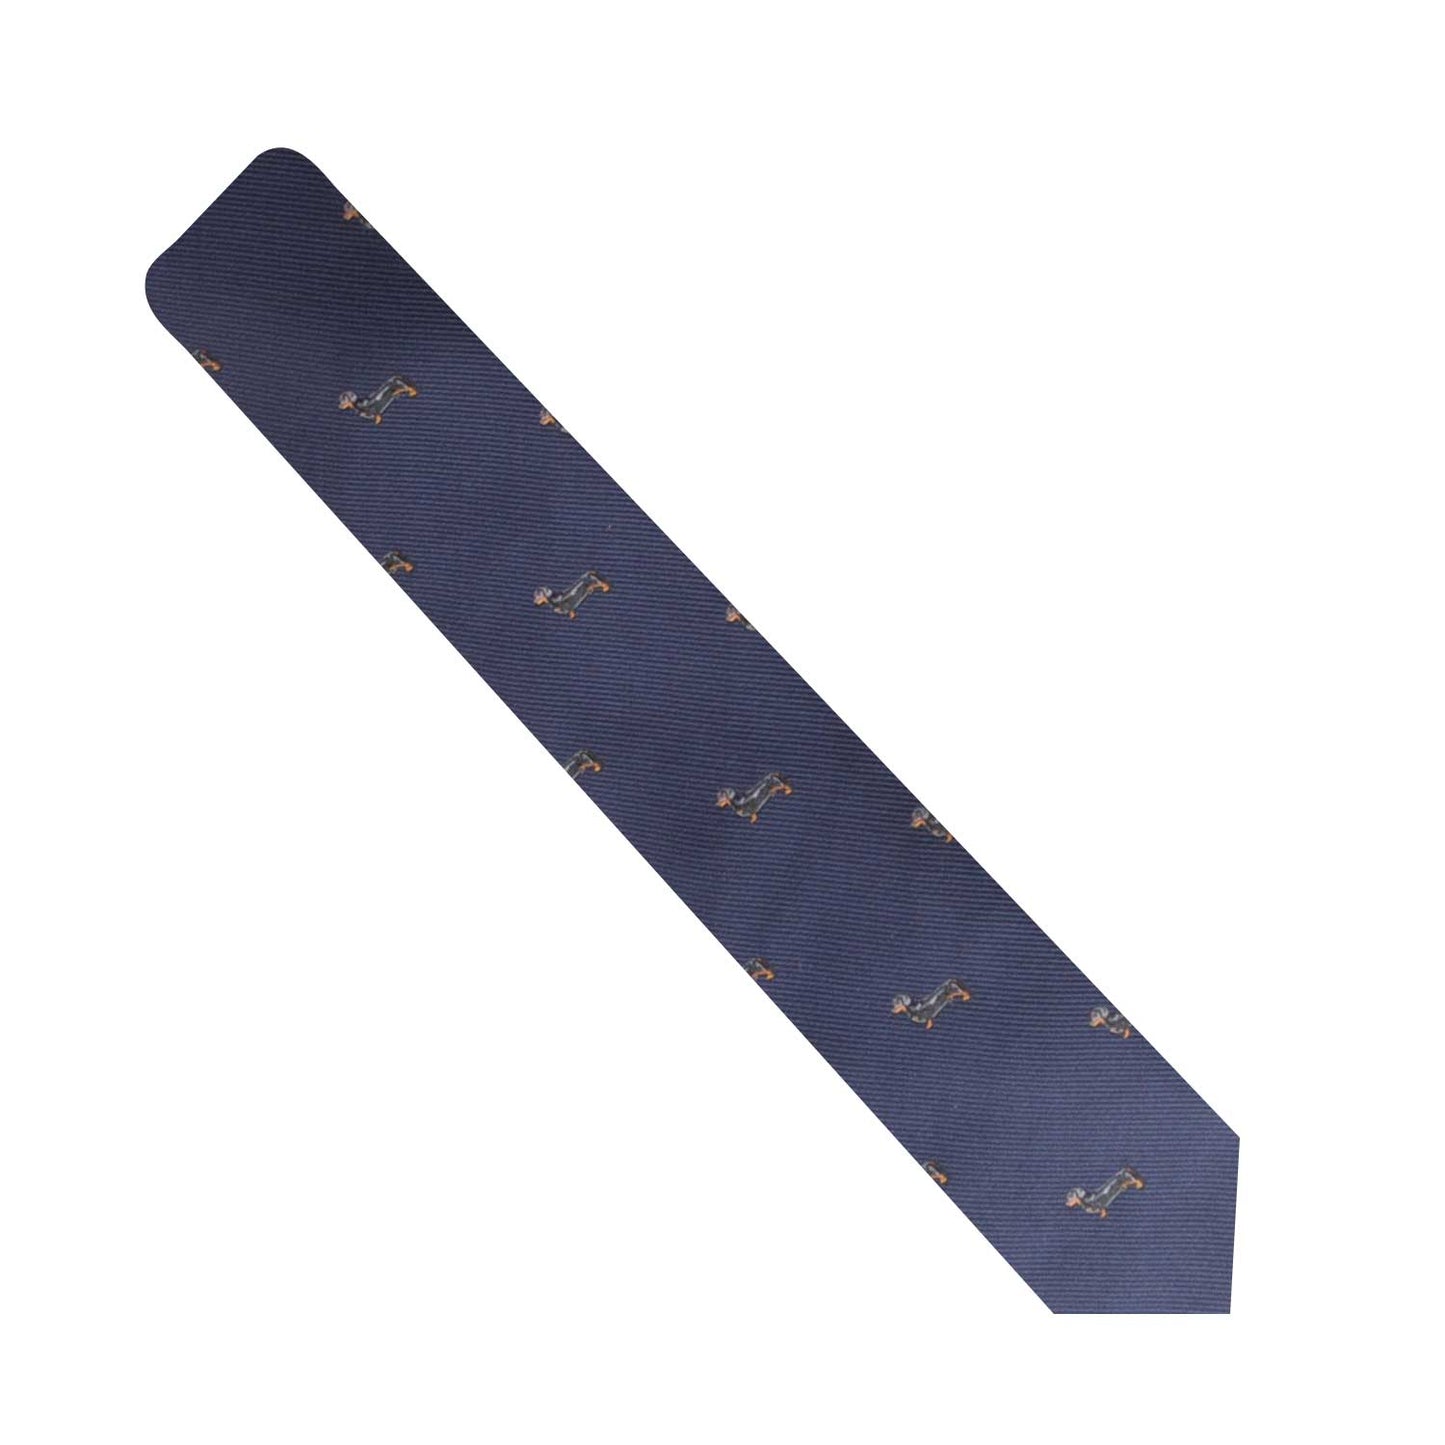 A playful Sausage Dog Skinny Tie with a quirky charm and a gold logo on it.